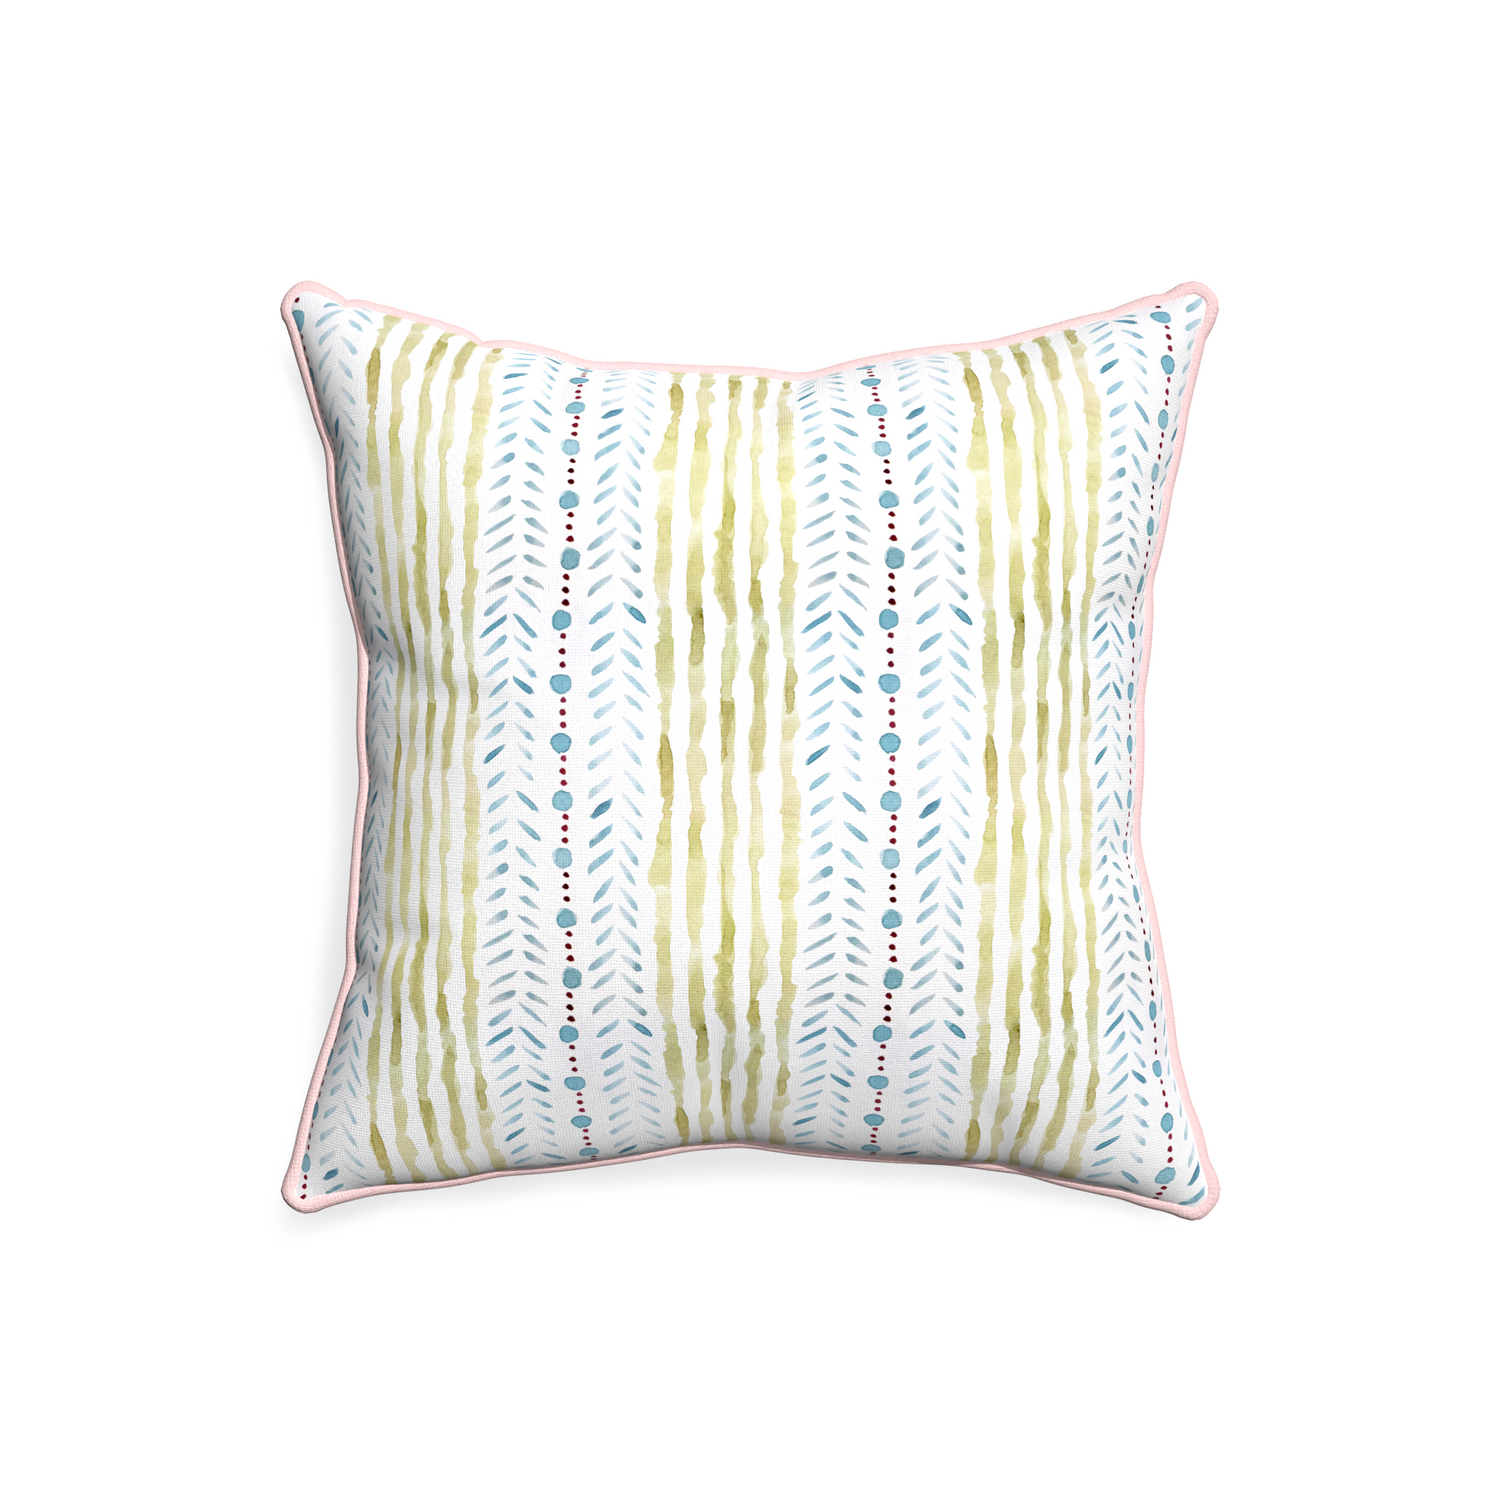 20-square julia custom blue & green stripedpillow with petal piping on white background